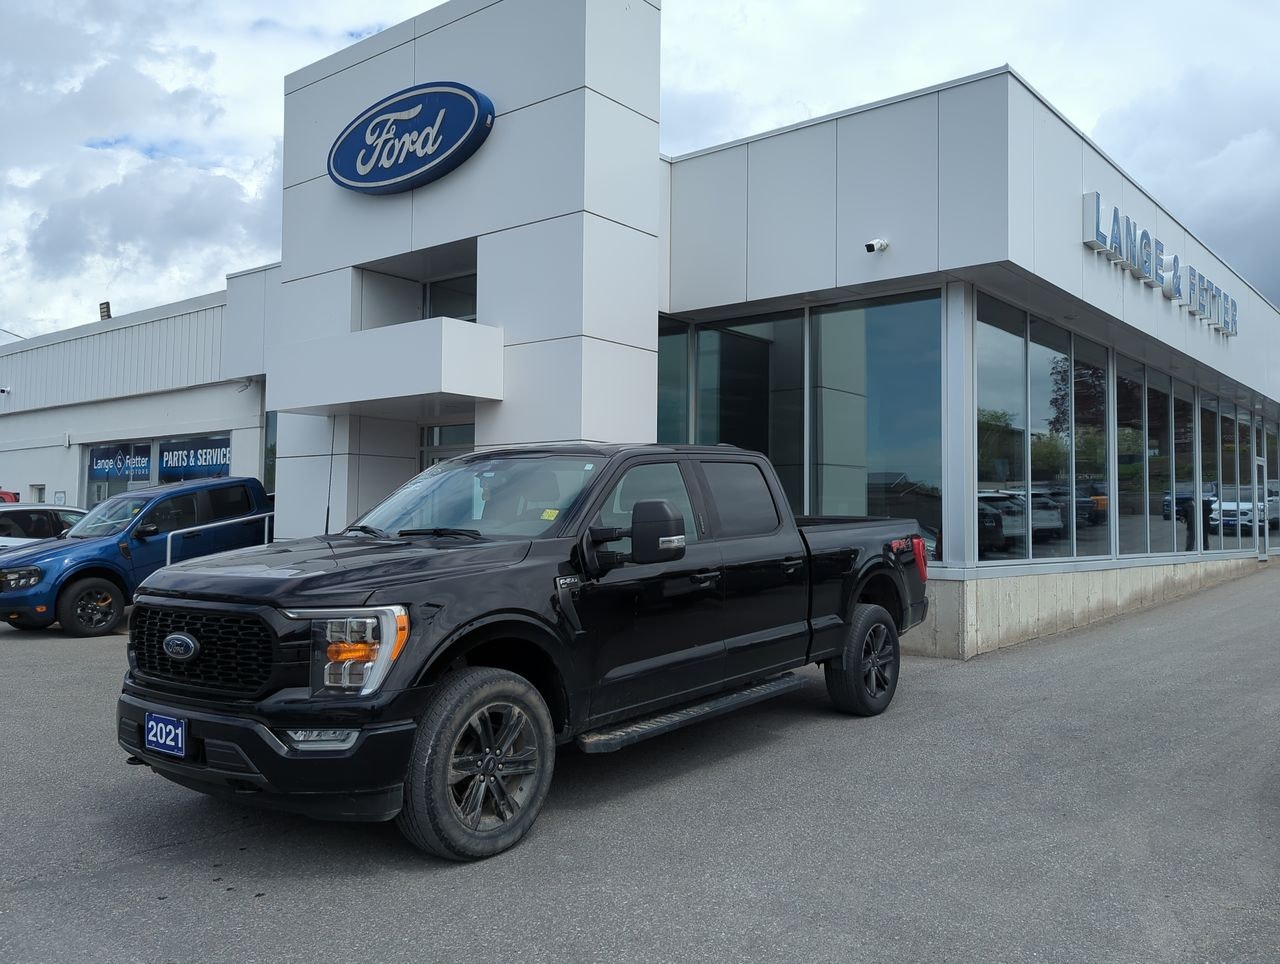 2021 Ford F-150 - 21697A Full Image 1